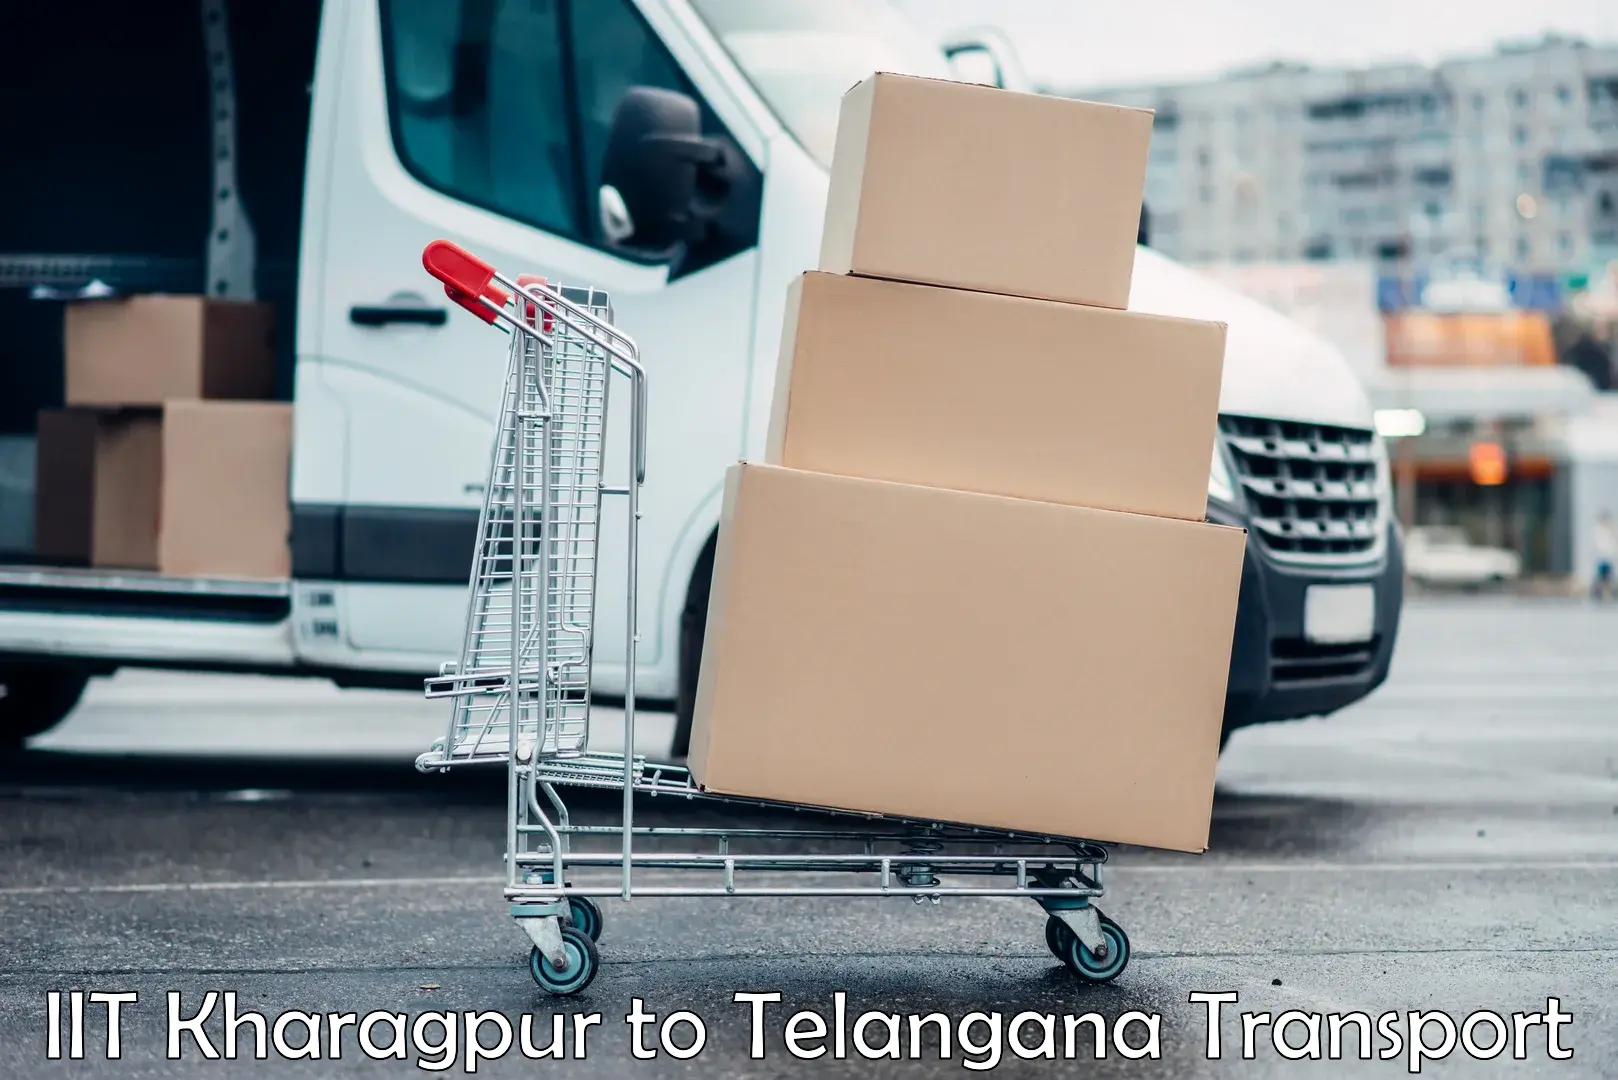 Daily parcel service transport IIT Kharagpur to Mominpet